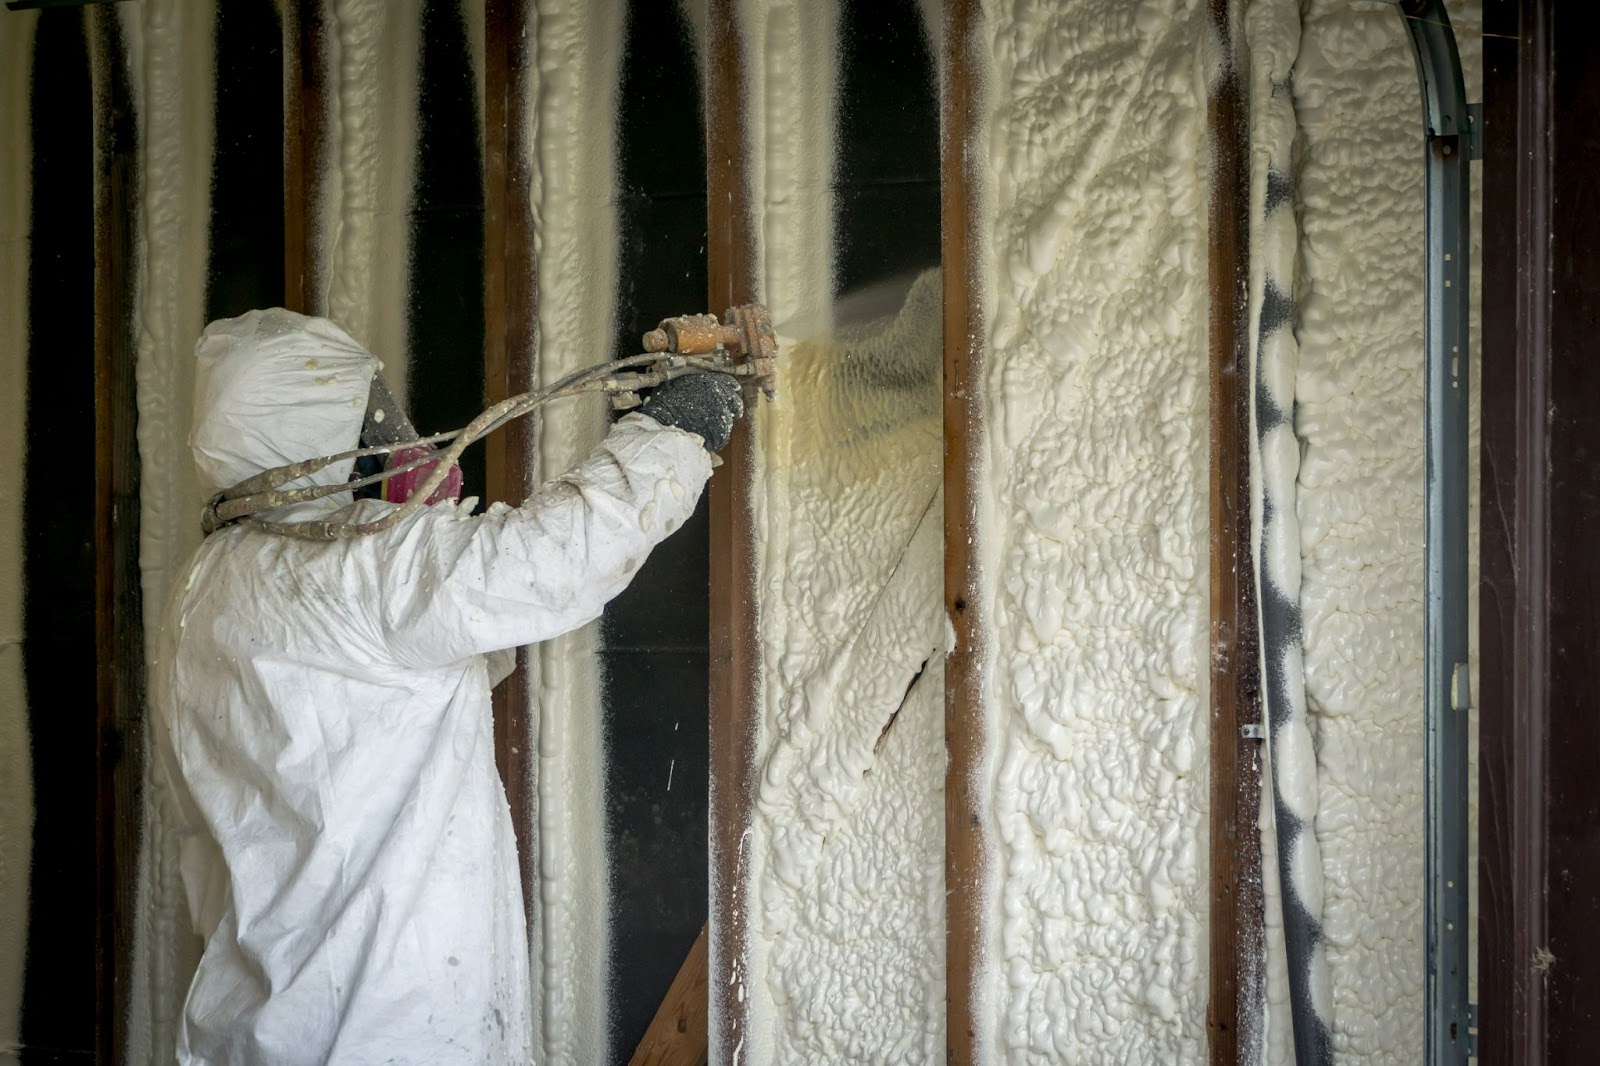 Low-density, open-cell spray insulation